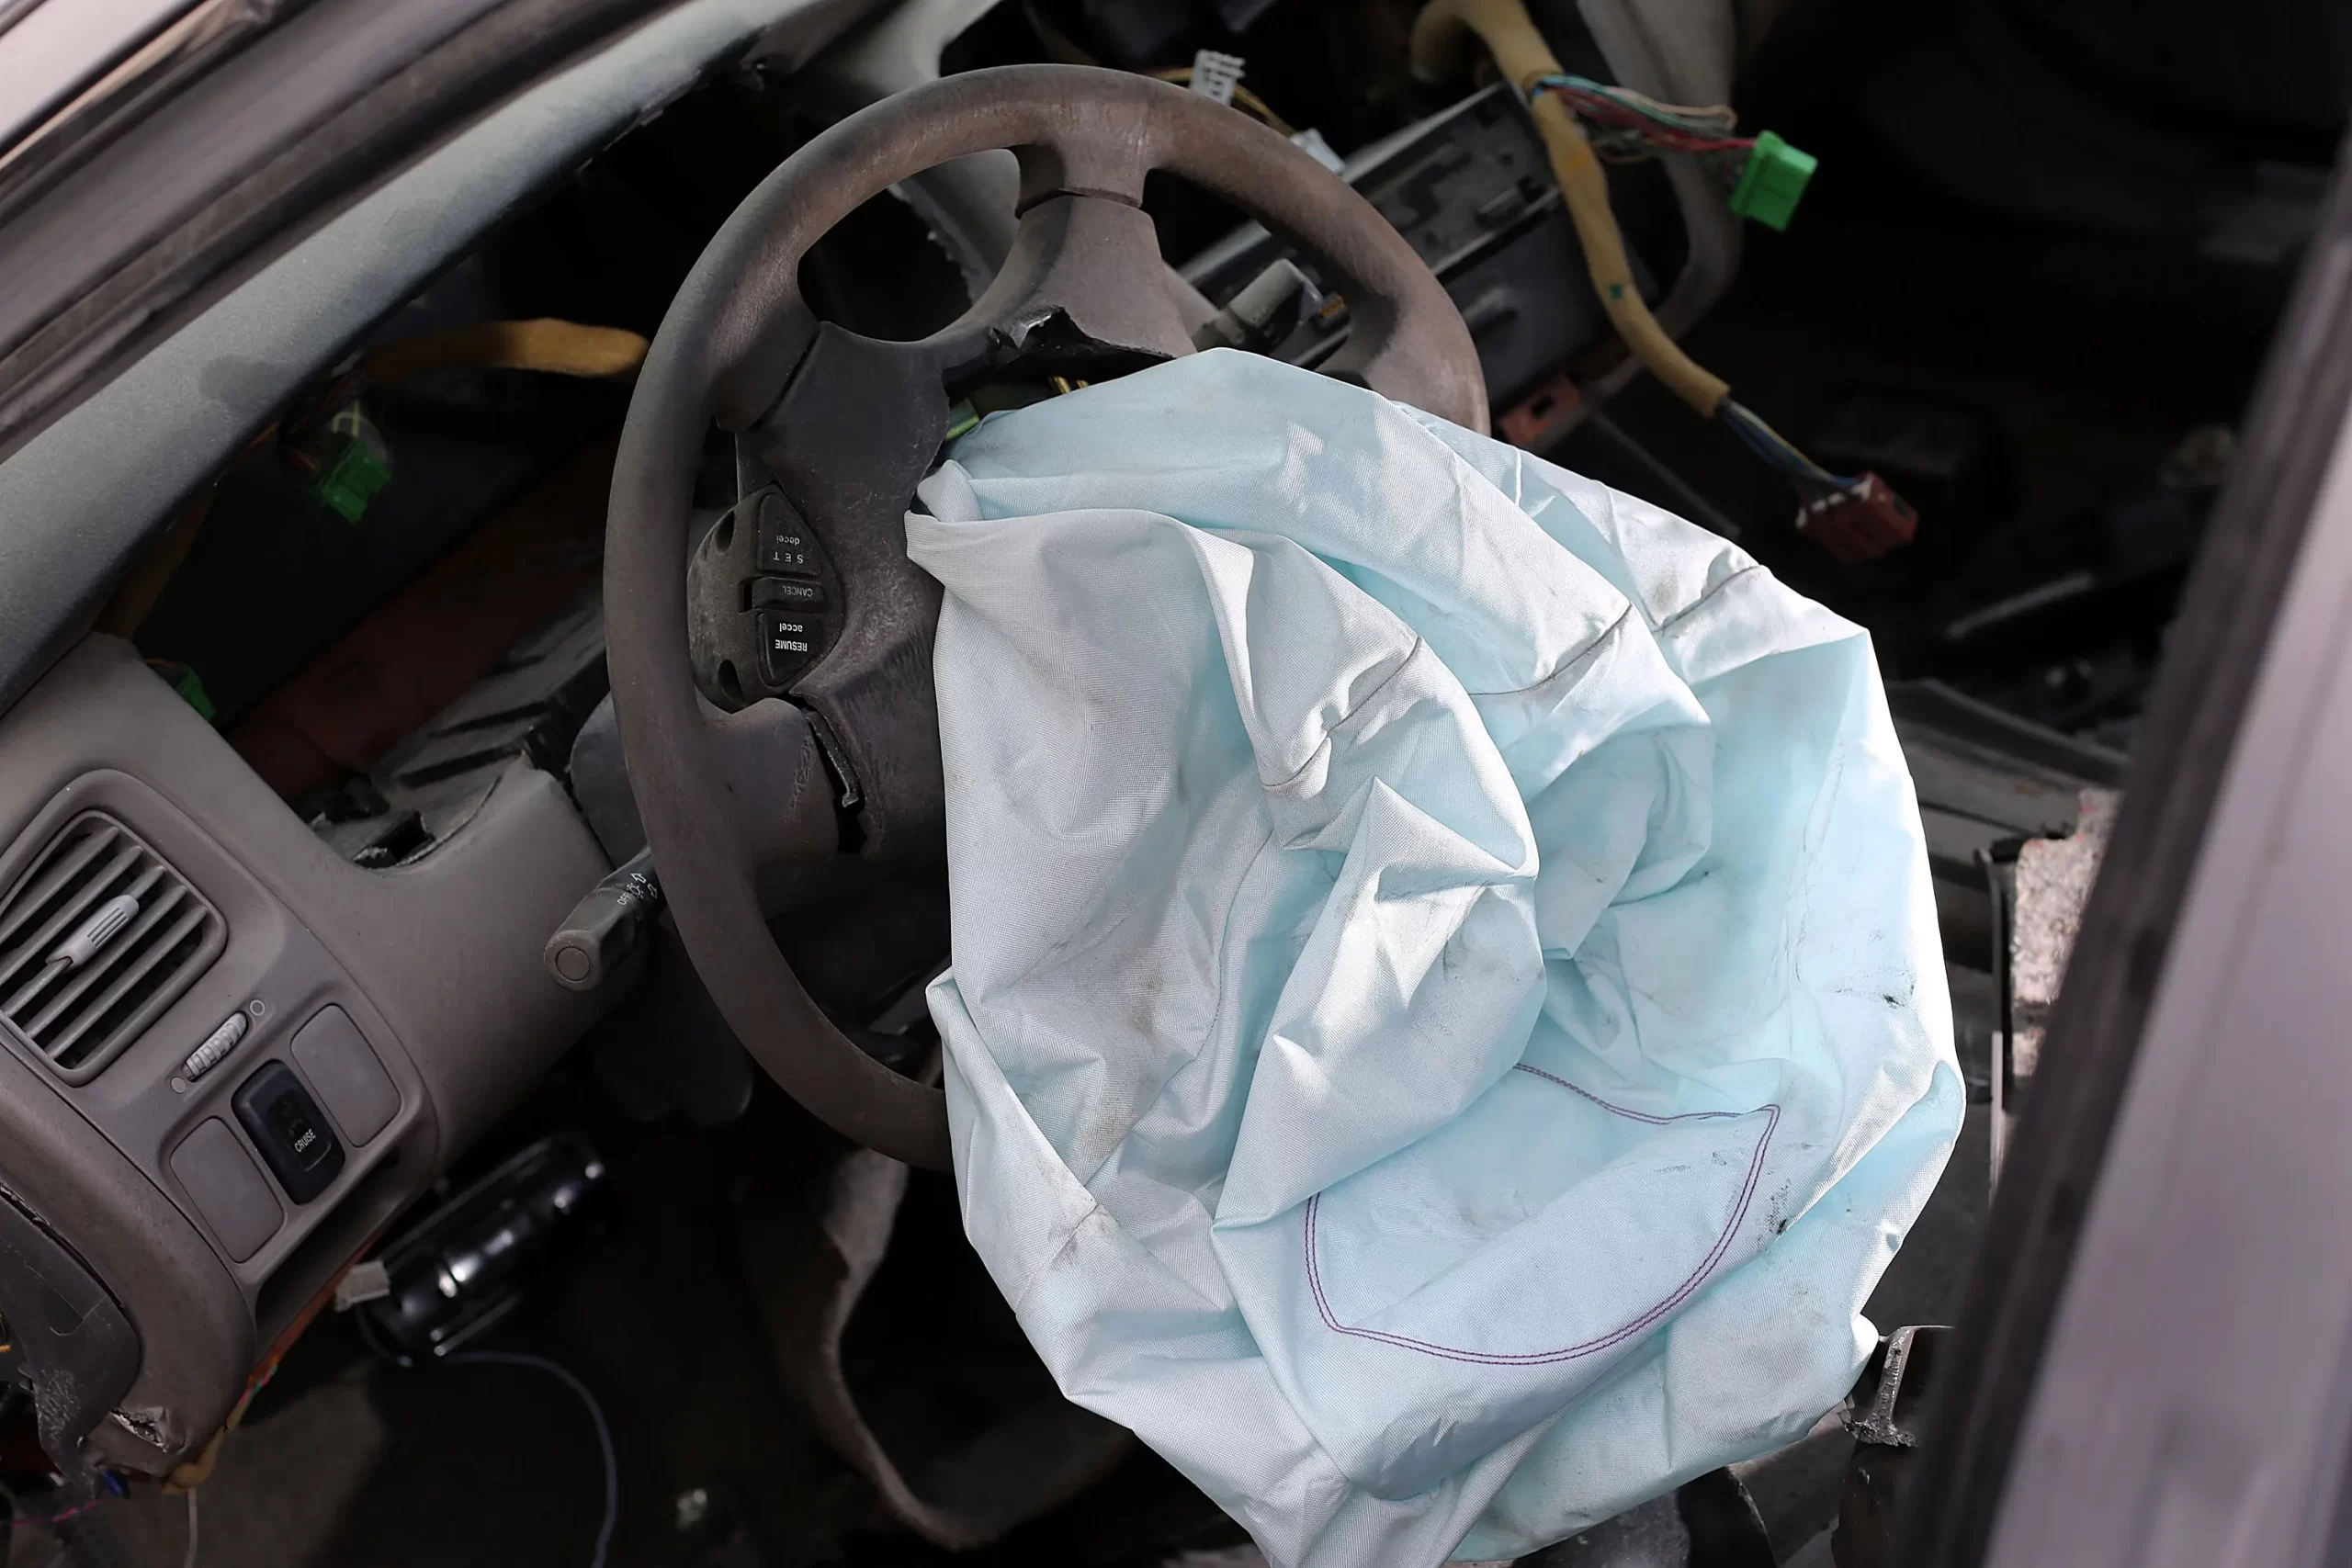 Recall On Mercedes-Benz Airbag: What You Need to Know as an Owner